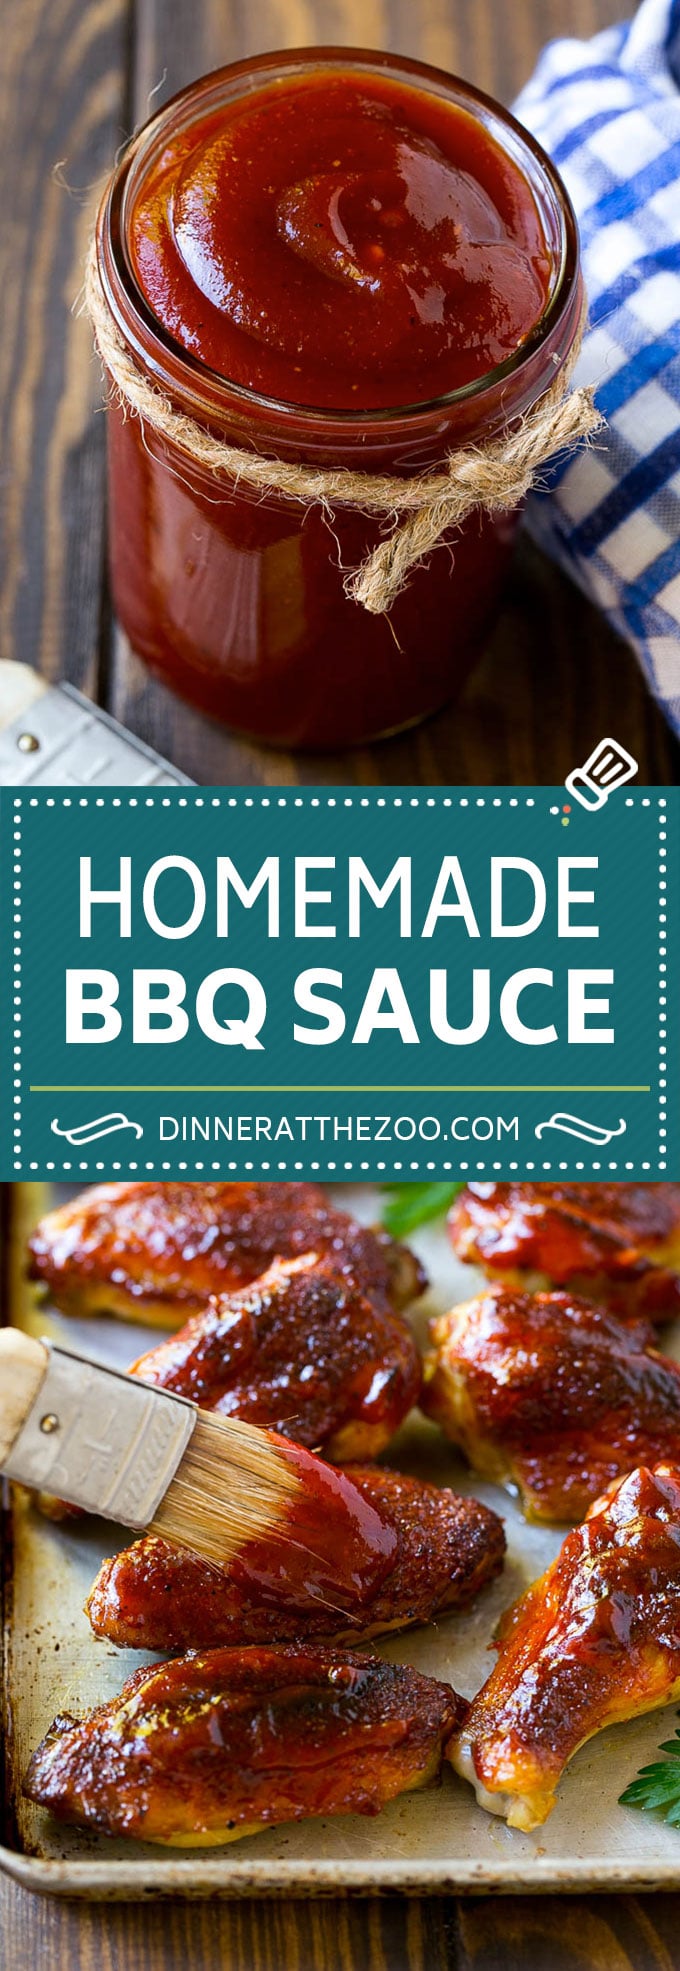 Homemade BBQ Sauce Recipe | Barbecue Sauce Recipe #bbq #grilling #sauce #condiments #dinneratthezoo